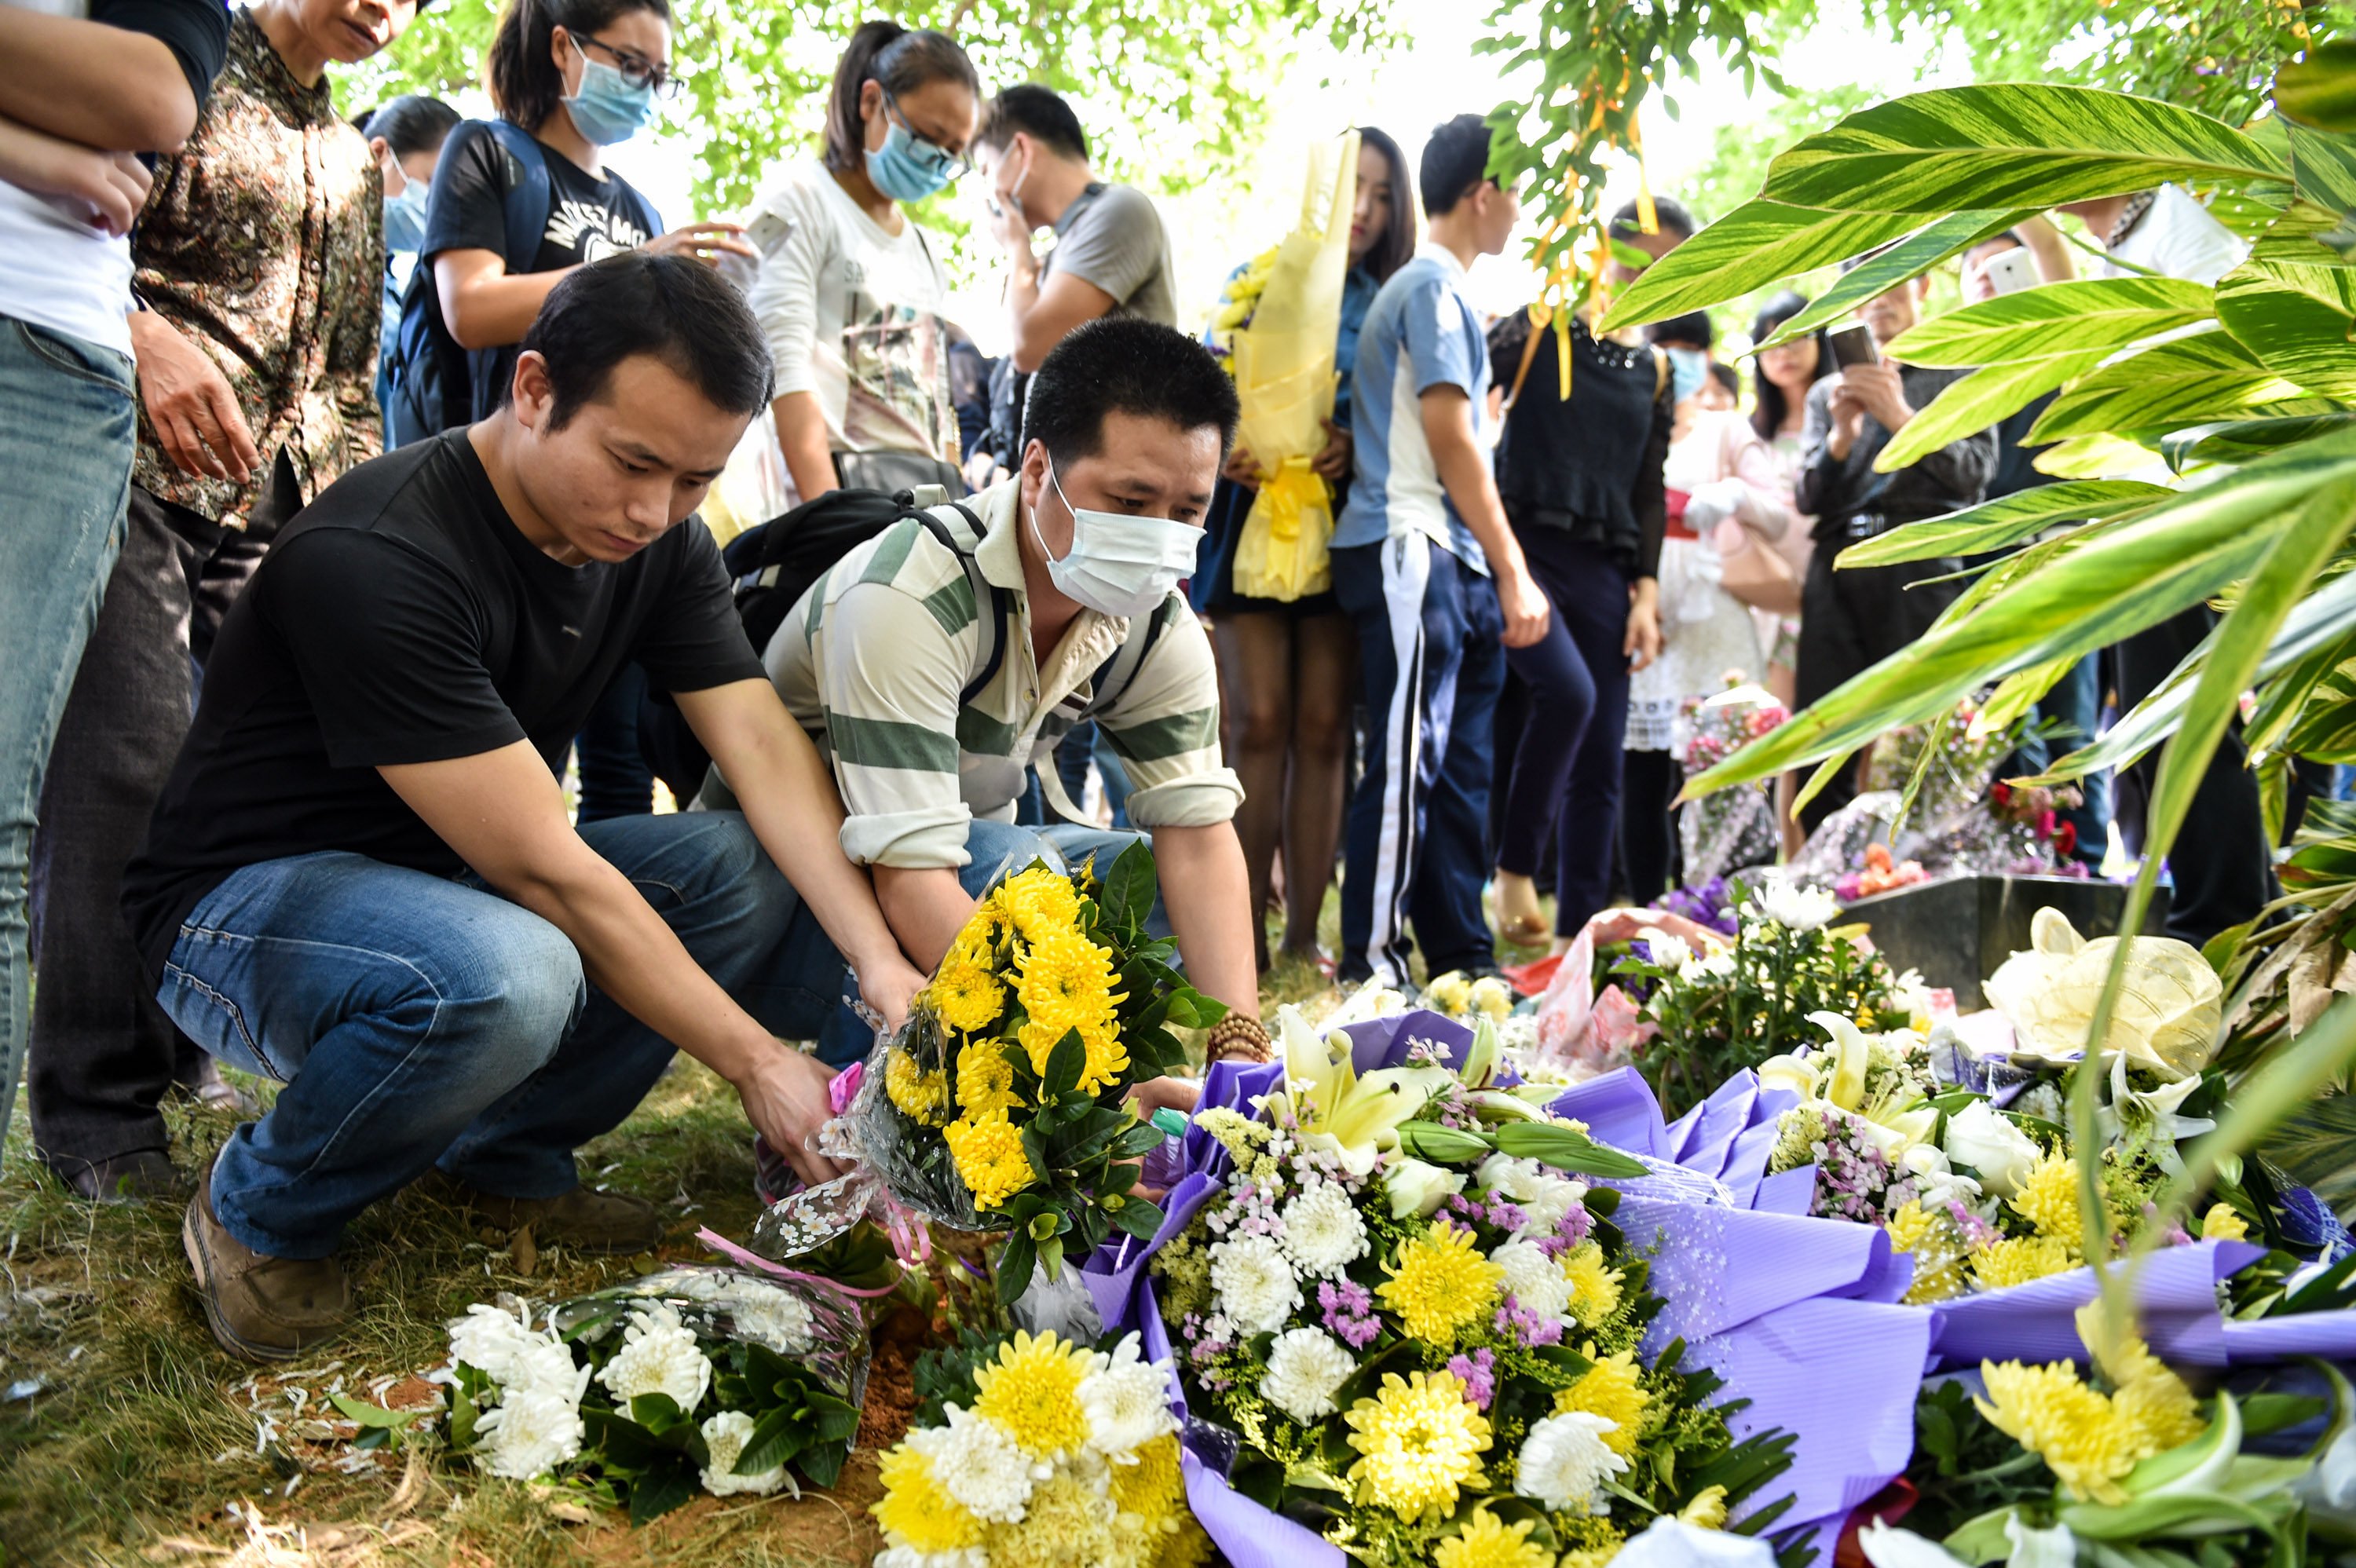 Mourners place the ashes of loved ones next to a tree in an environmentally friendly burial paid for by the Shenzhen government to encourage “green burials”. Photo: Xinhua